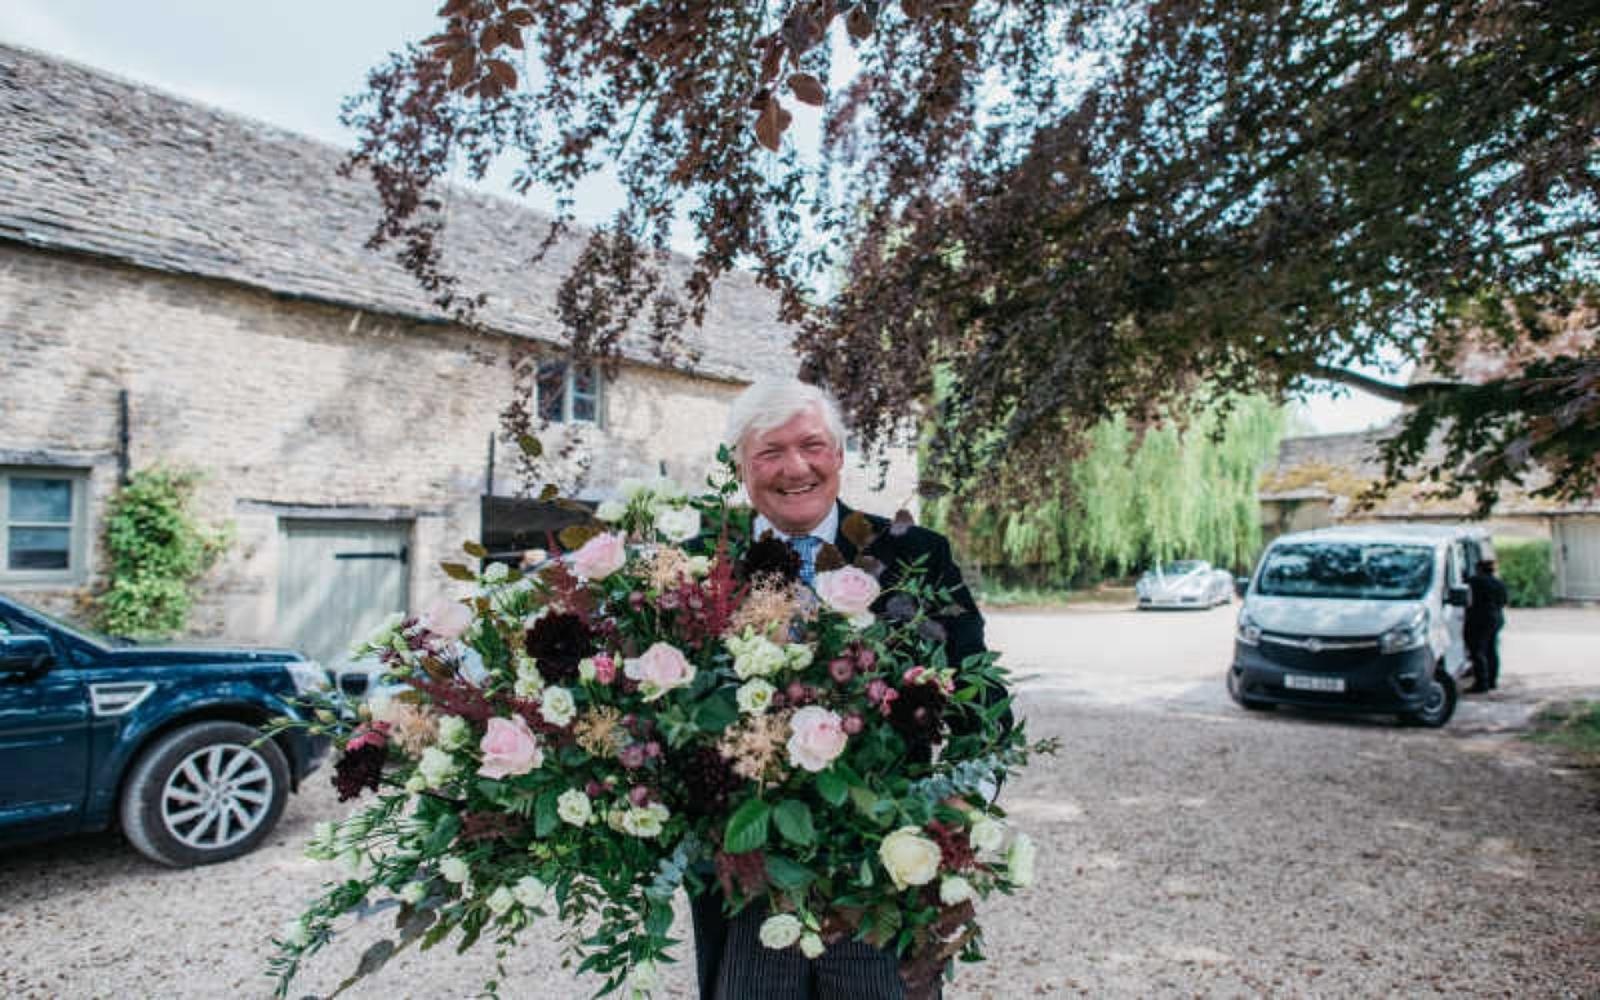 Corky and Prince Real Wedding Florist Gloucestershire Old Cotswold Mill House near Cirencester large bouquet